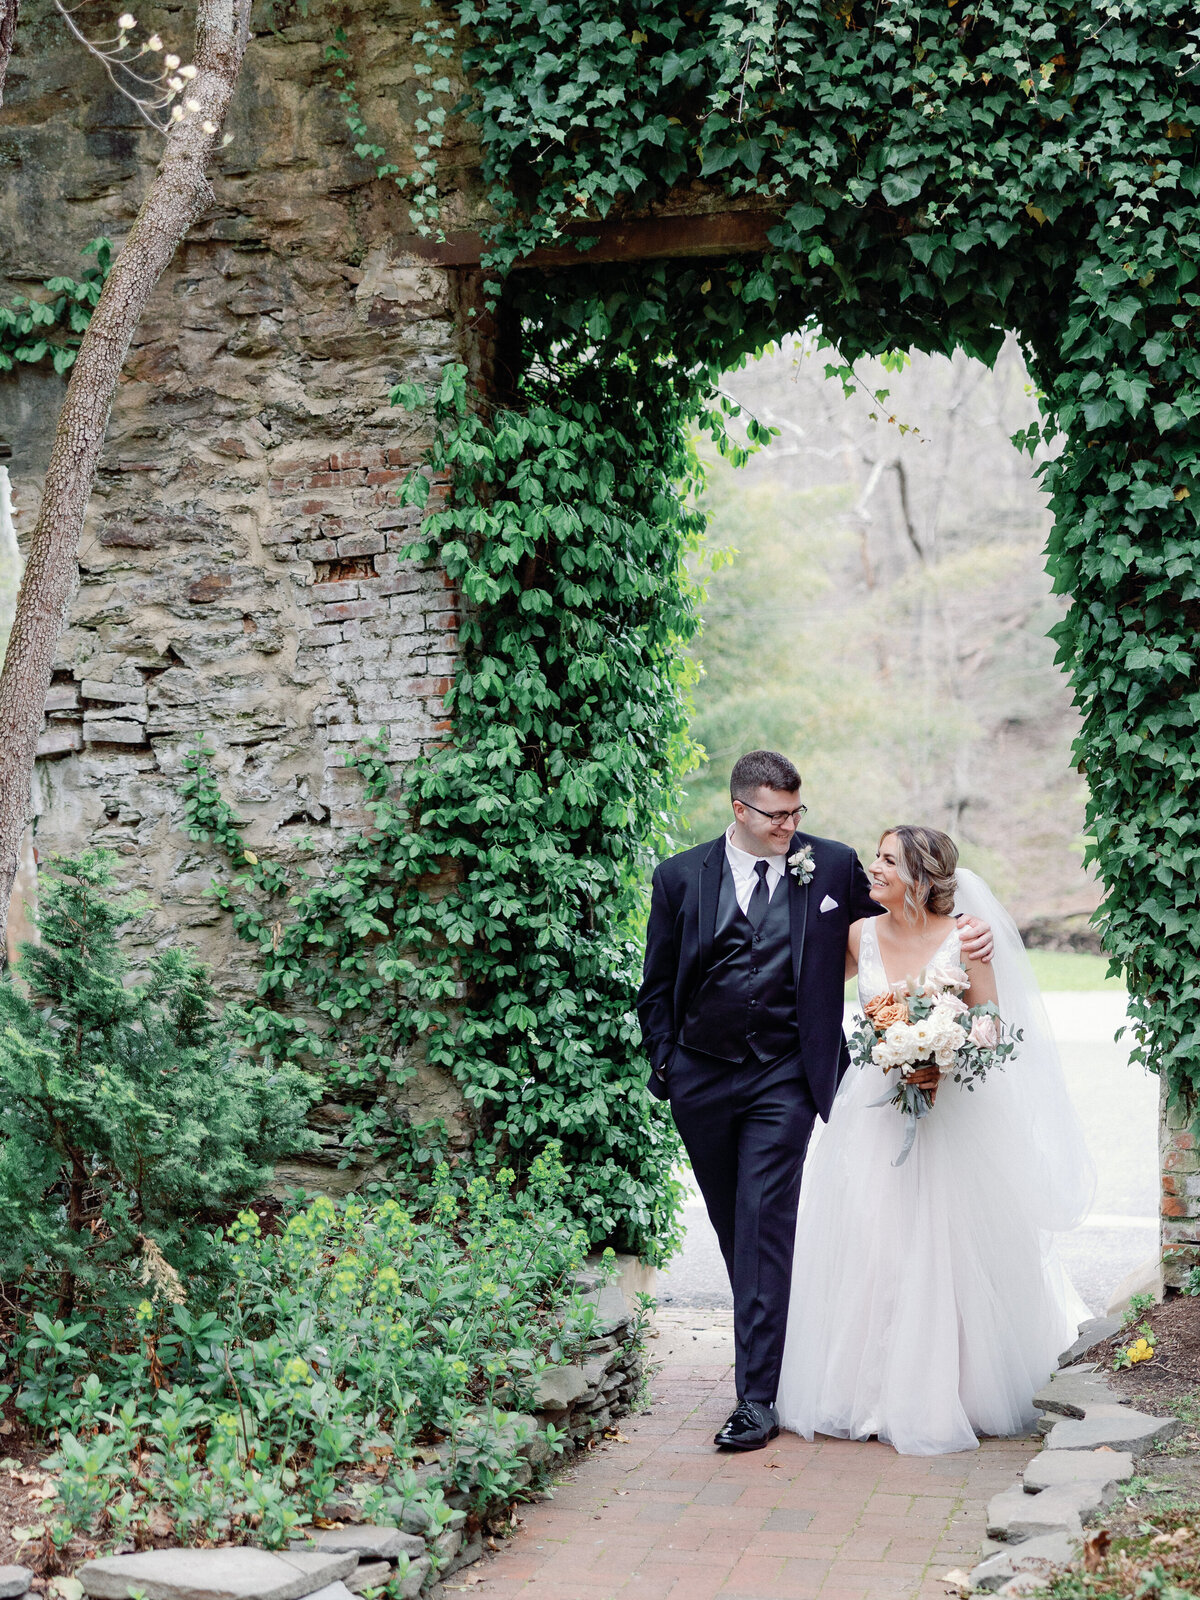 A bride and groom walk together under a stone archway that is covered in vibrant green ivy